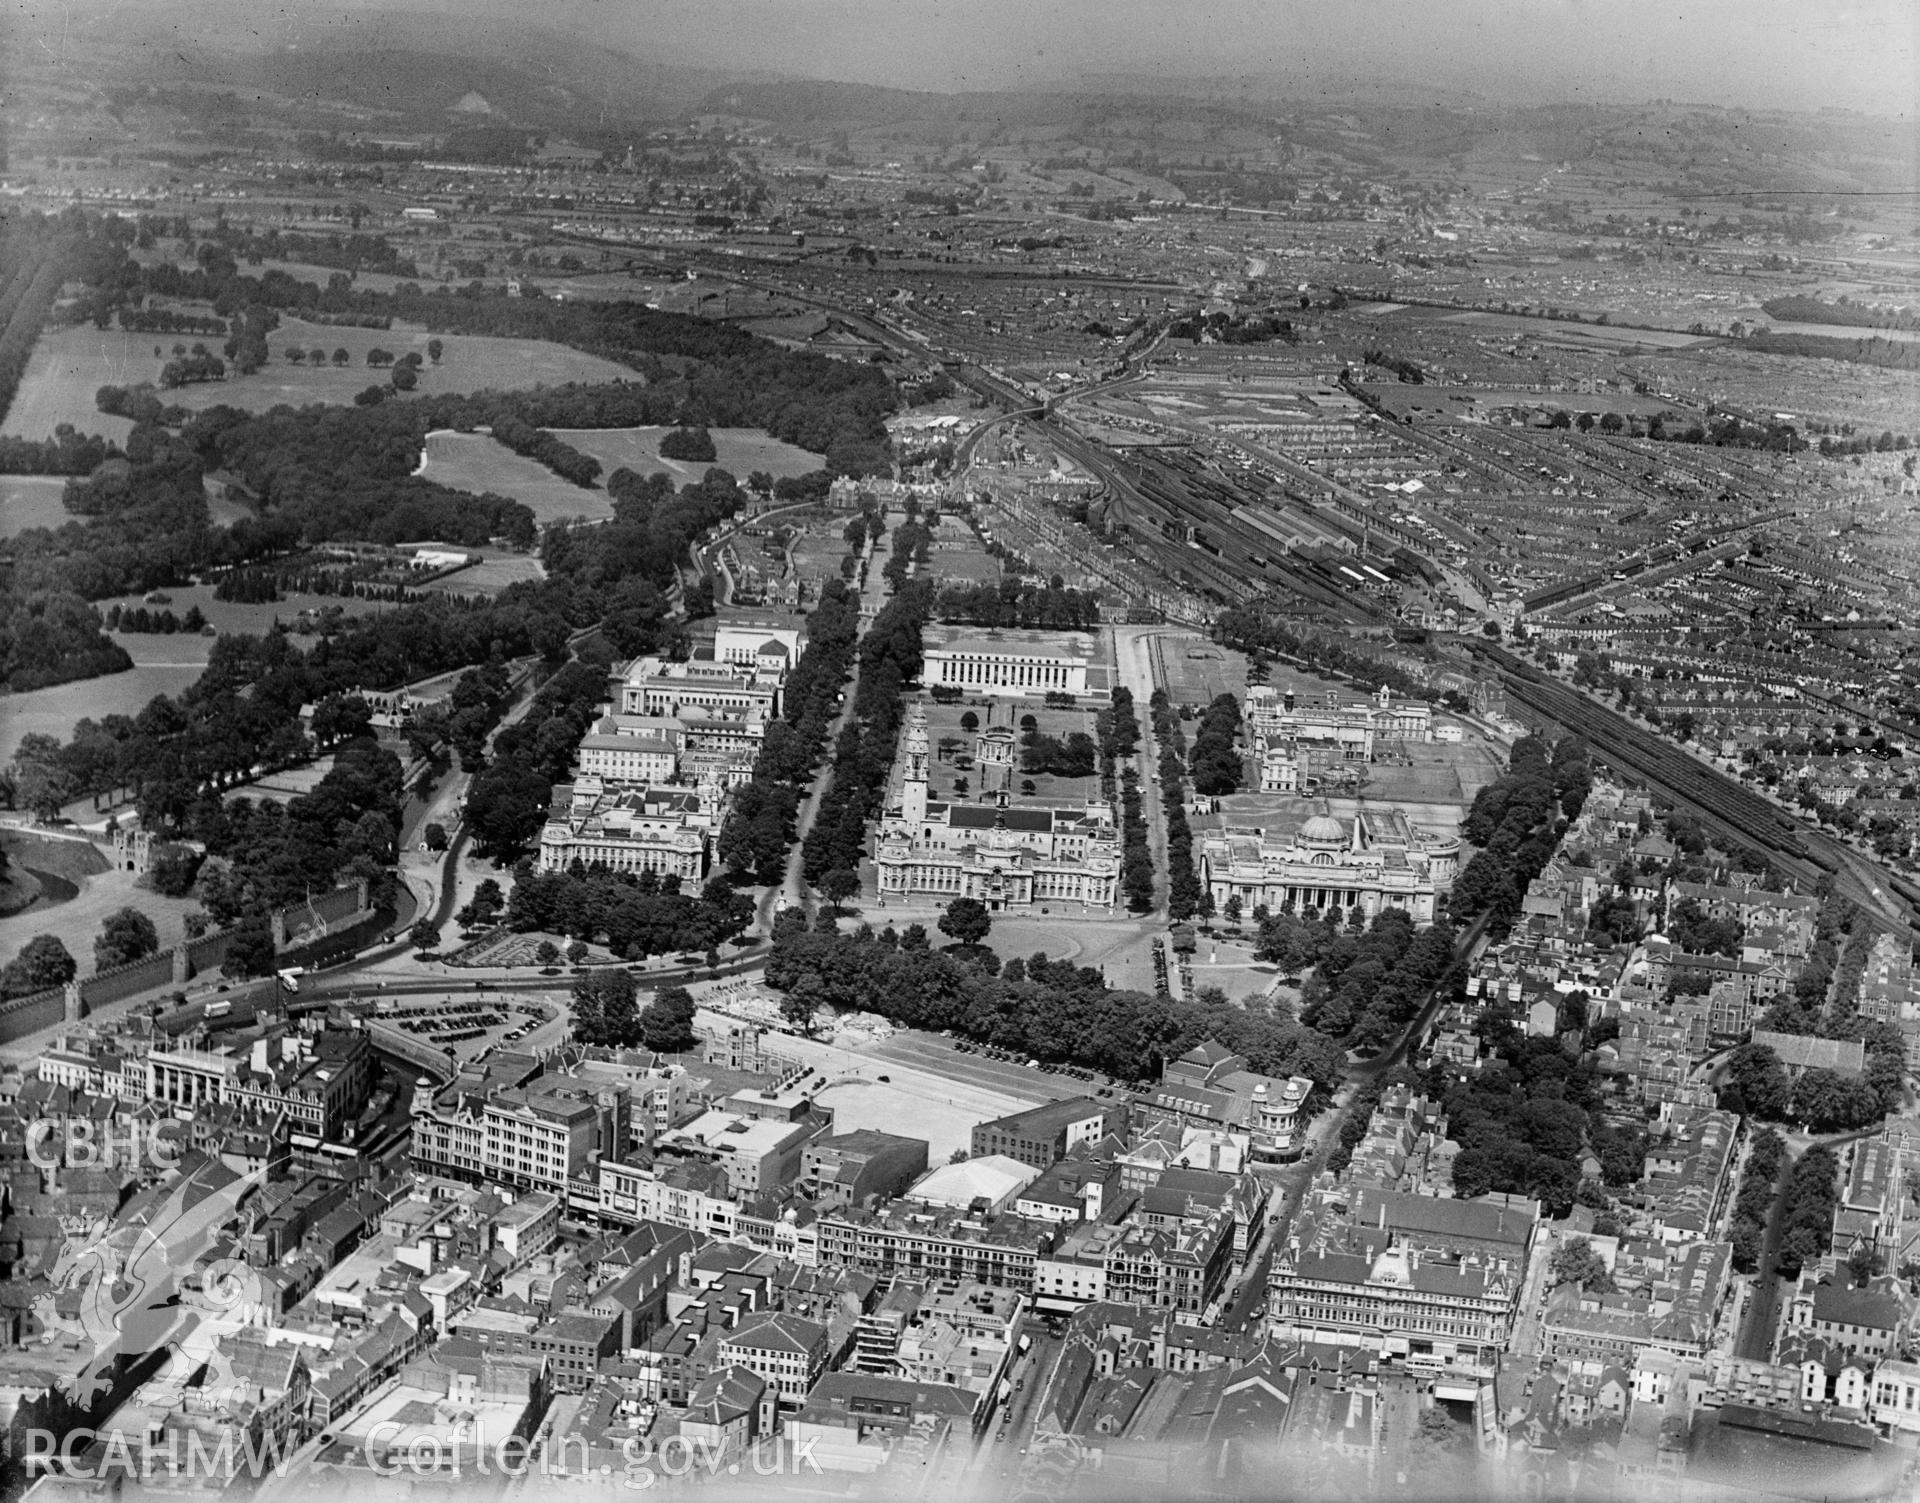 View of Cathays Park, Cardiff showing civic centre and war memorial, oblique aerial view. 5?x4? black and white glass plate negative.